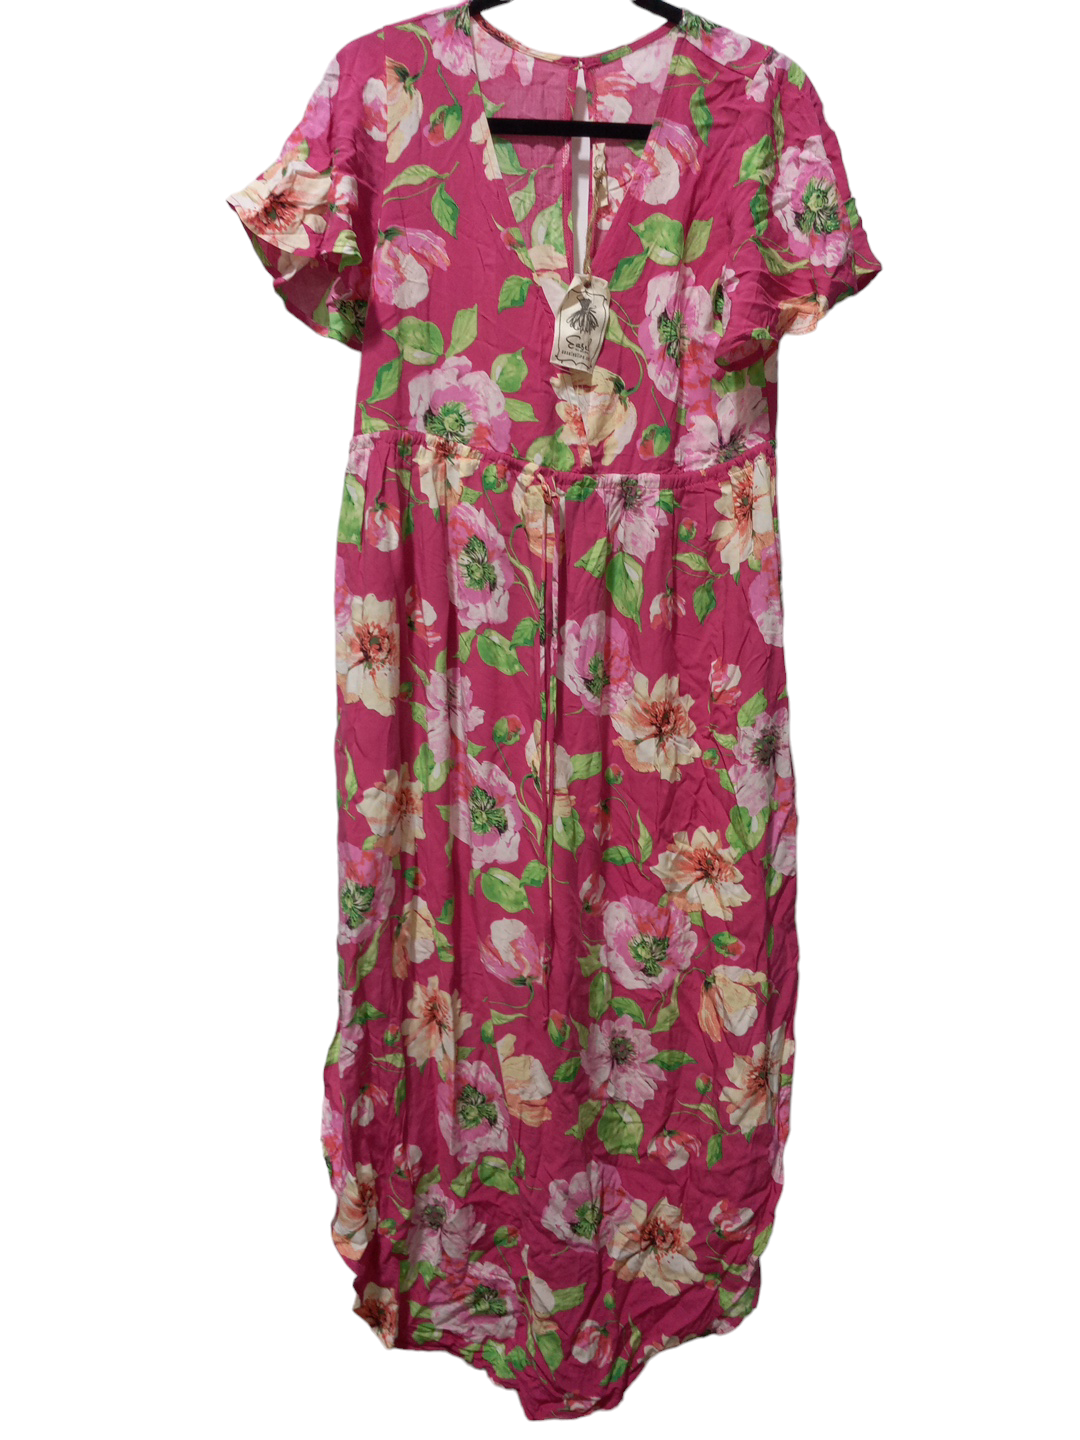 Floral Print Dress Casual Maxi Easel, Size S